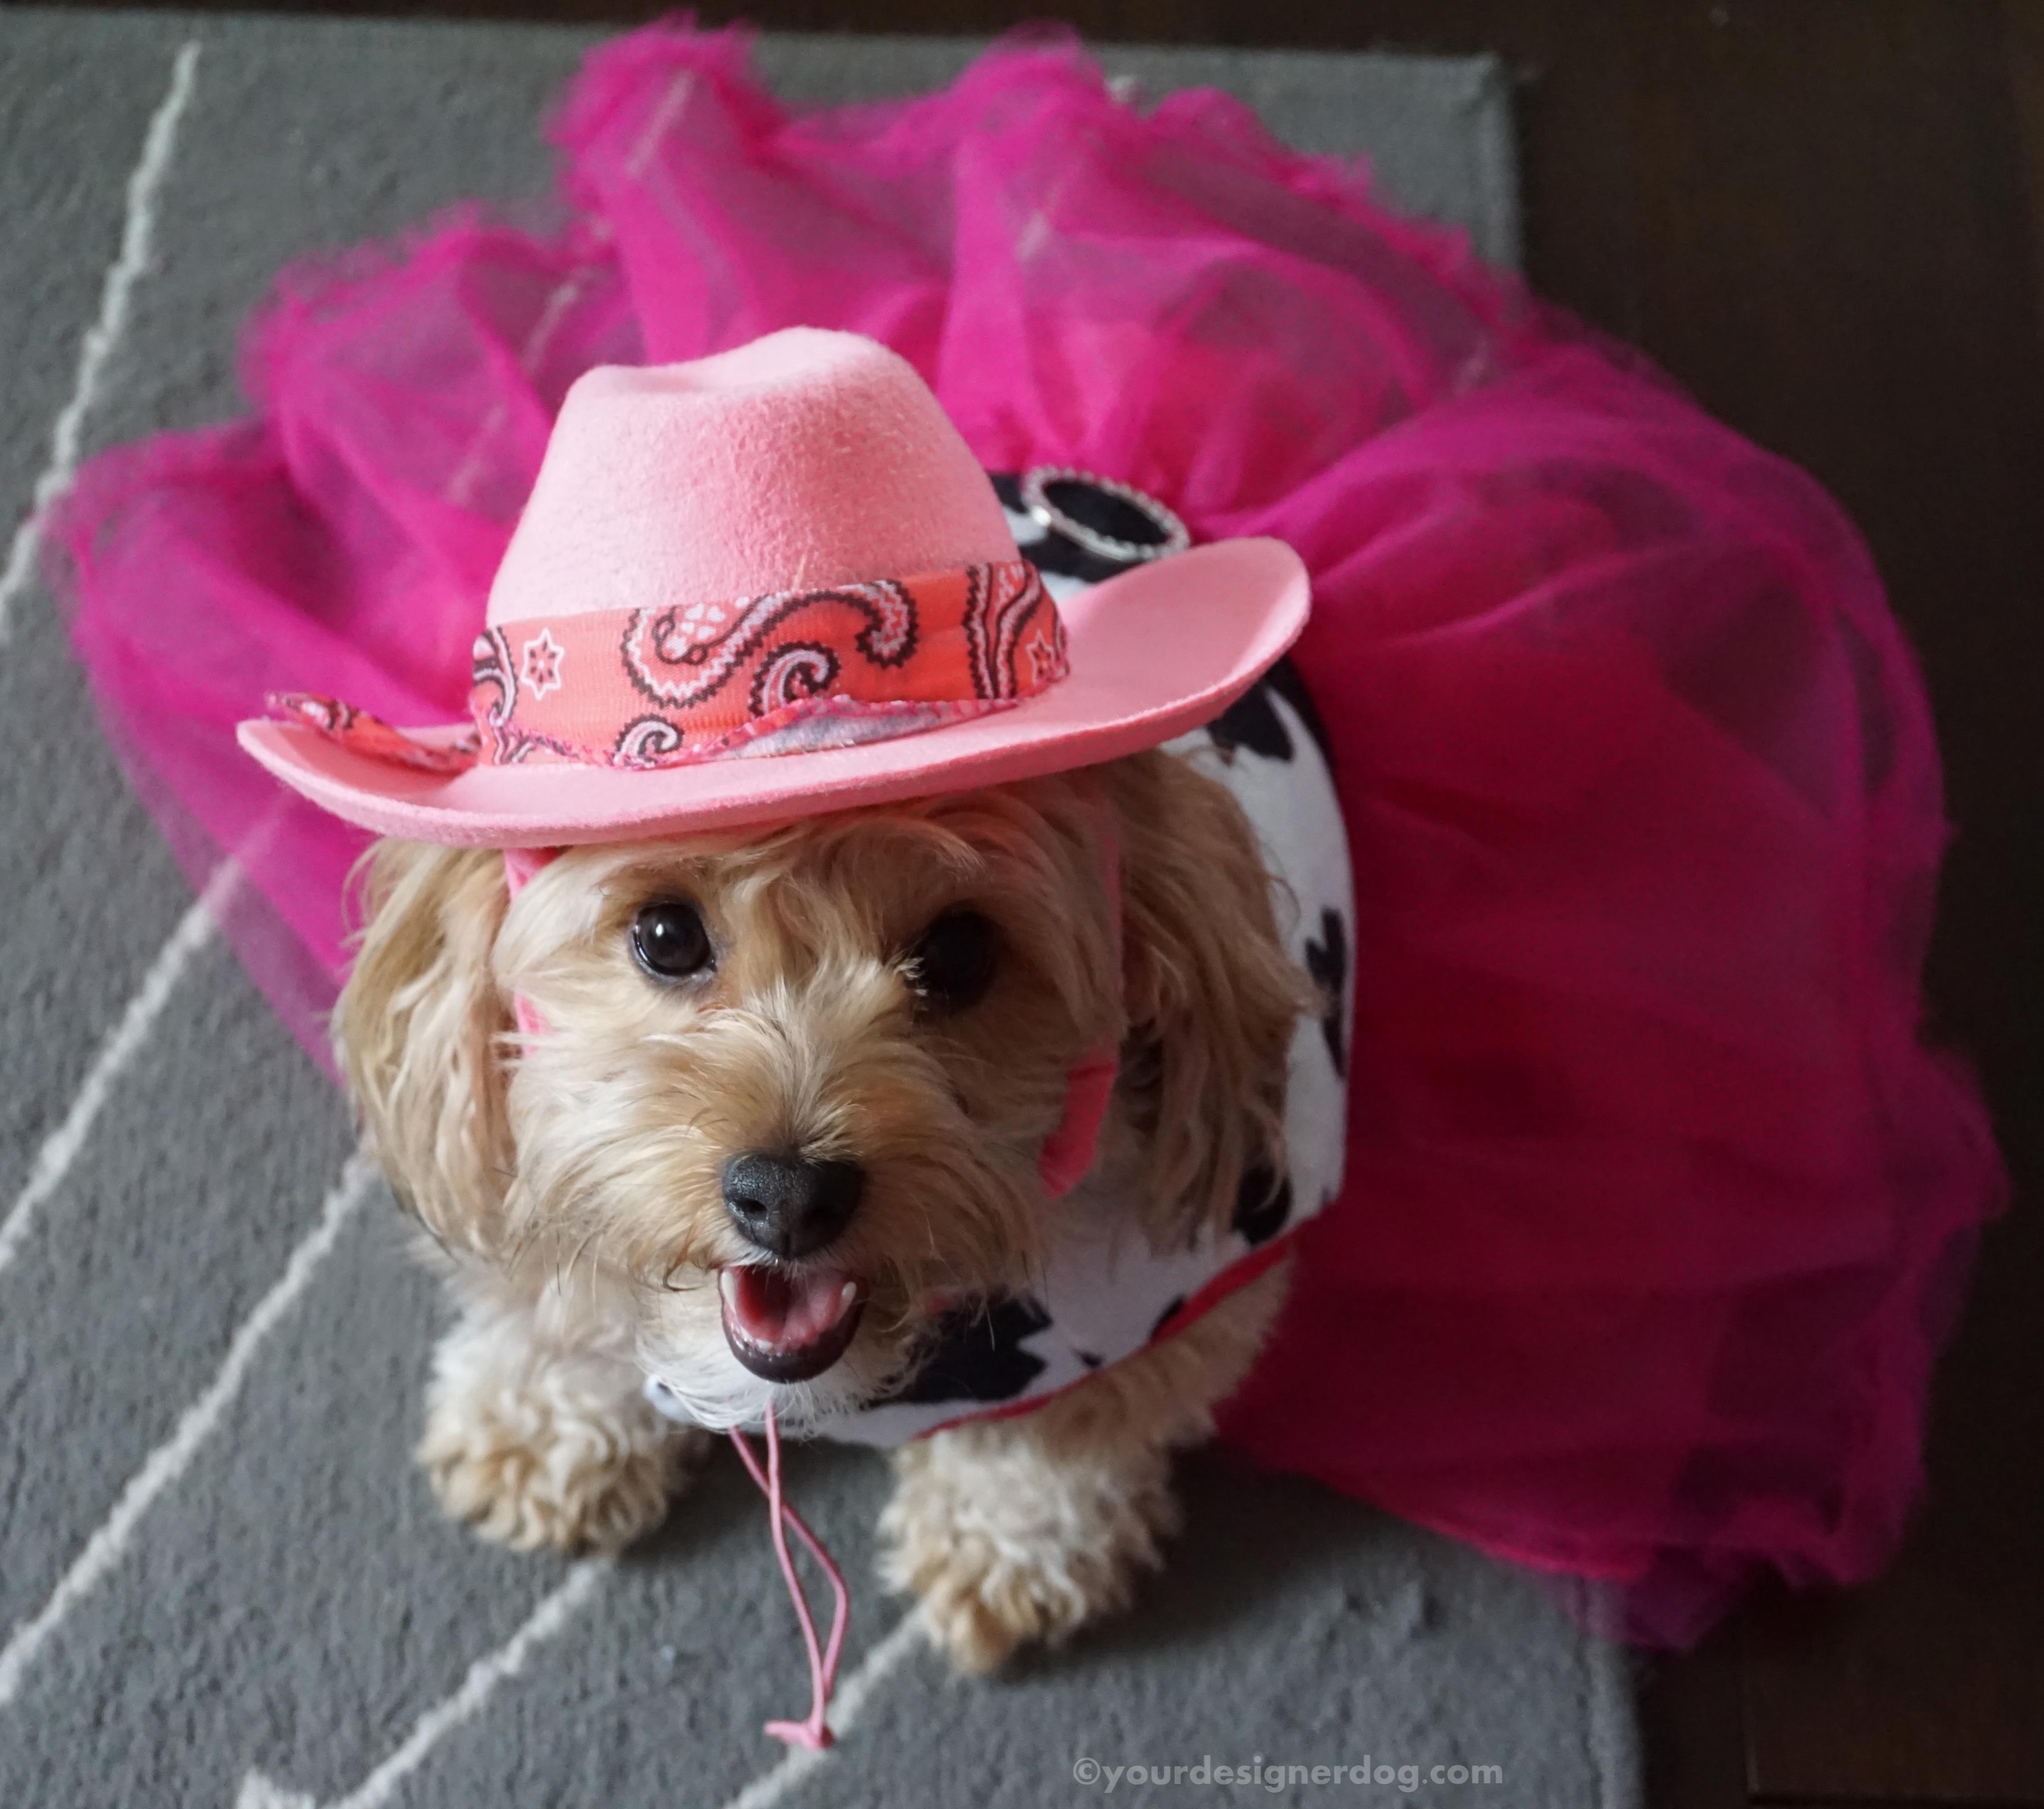 dogs, designer dogs, yorkipoo, yorkie poo, cowboy, cowgirl, tongue out, cowboy hat